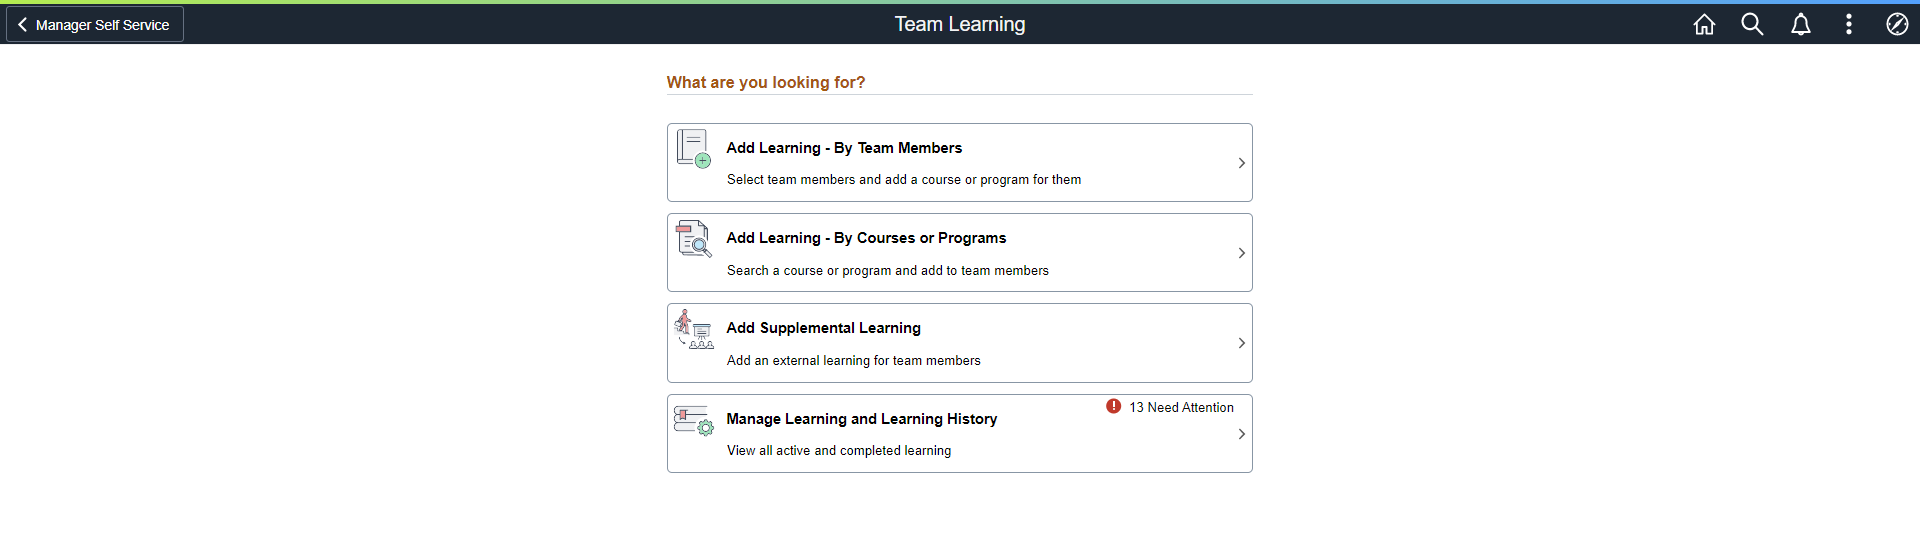 Team Learning Page